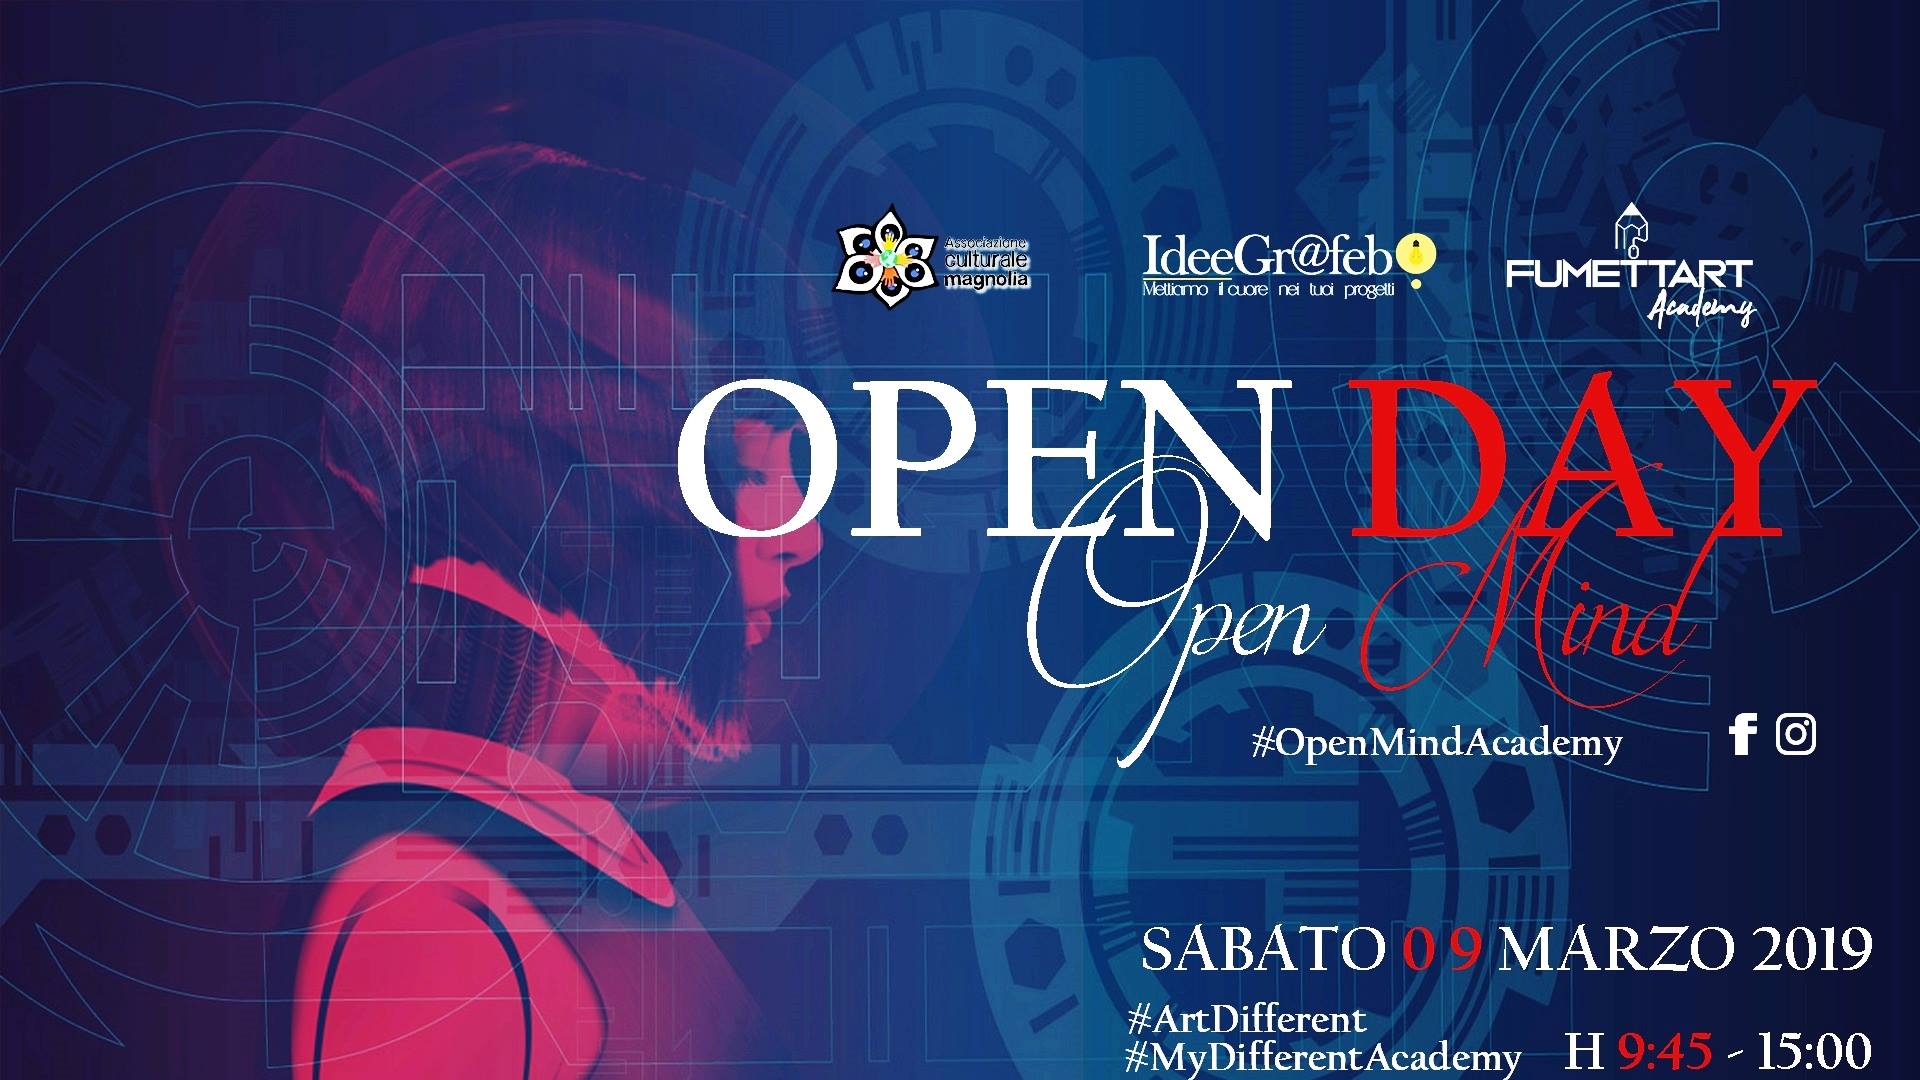 Open Day: Open Mind